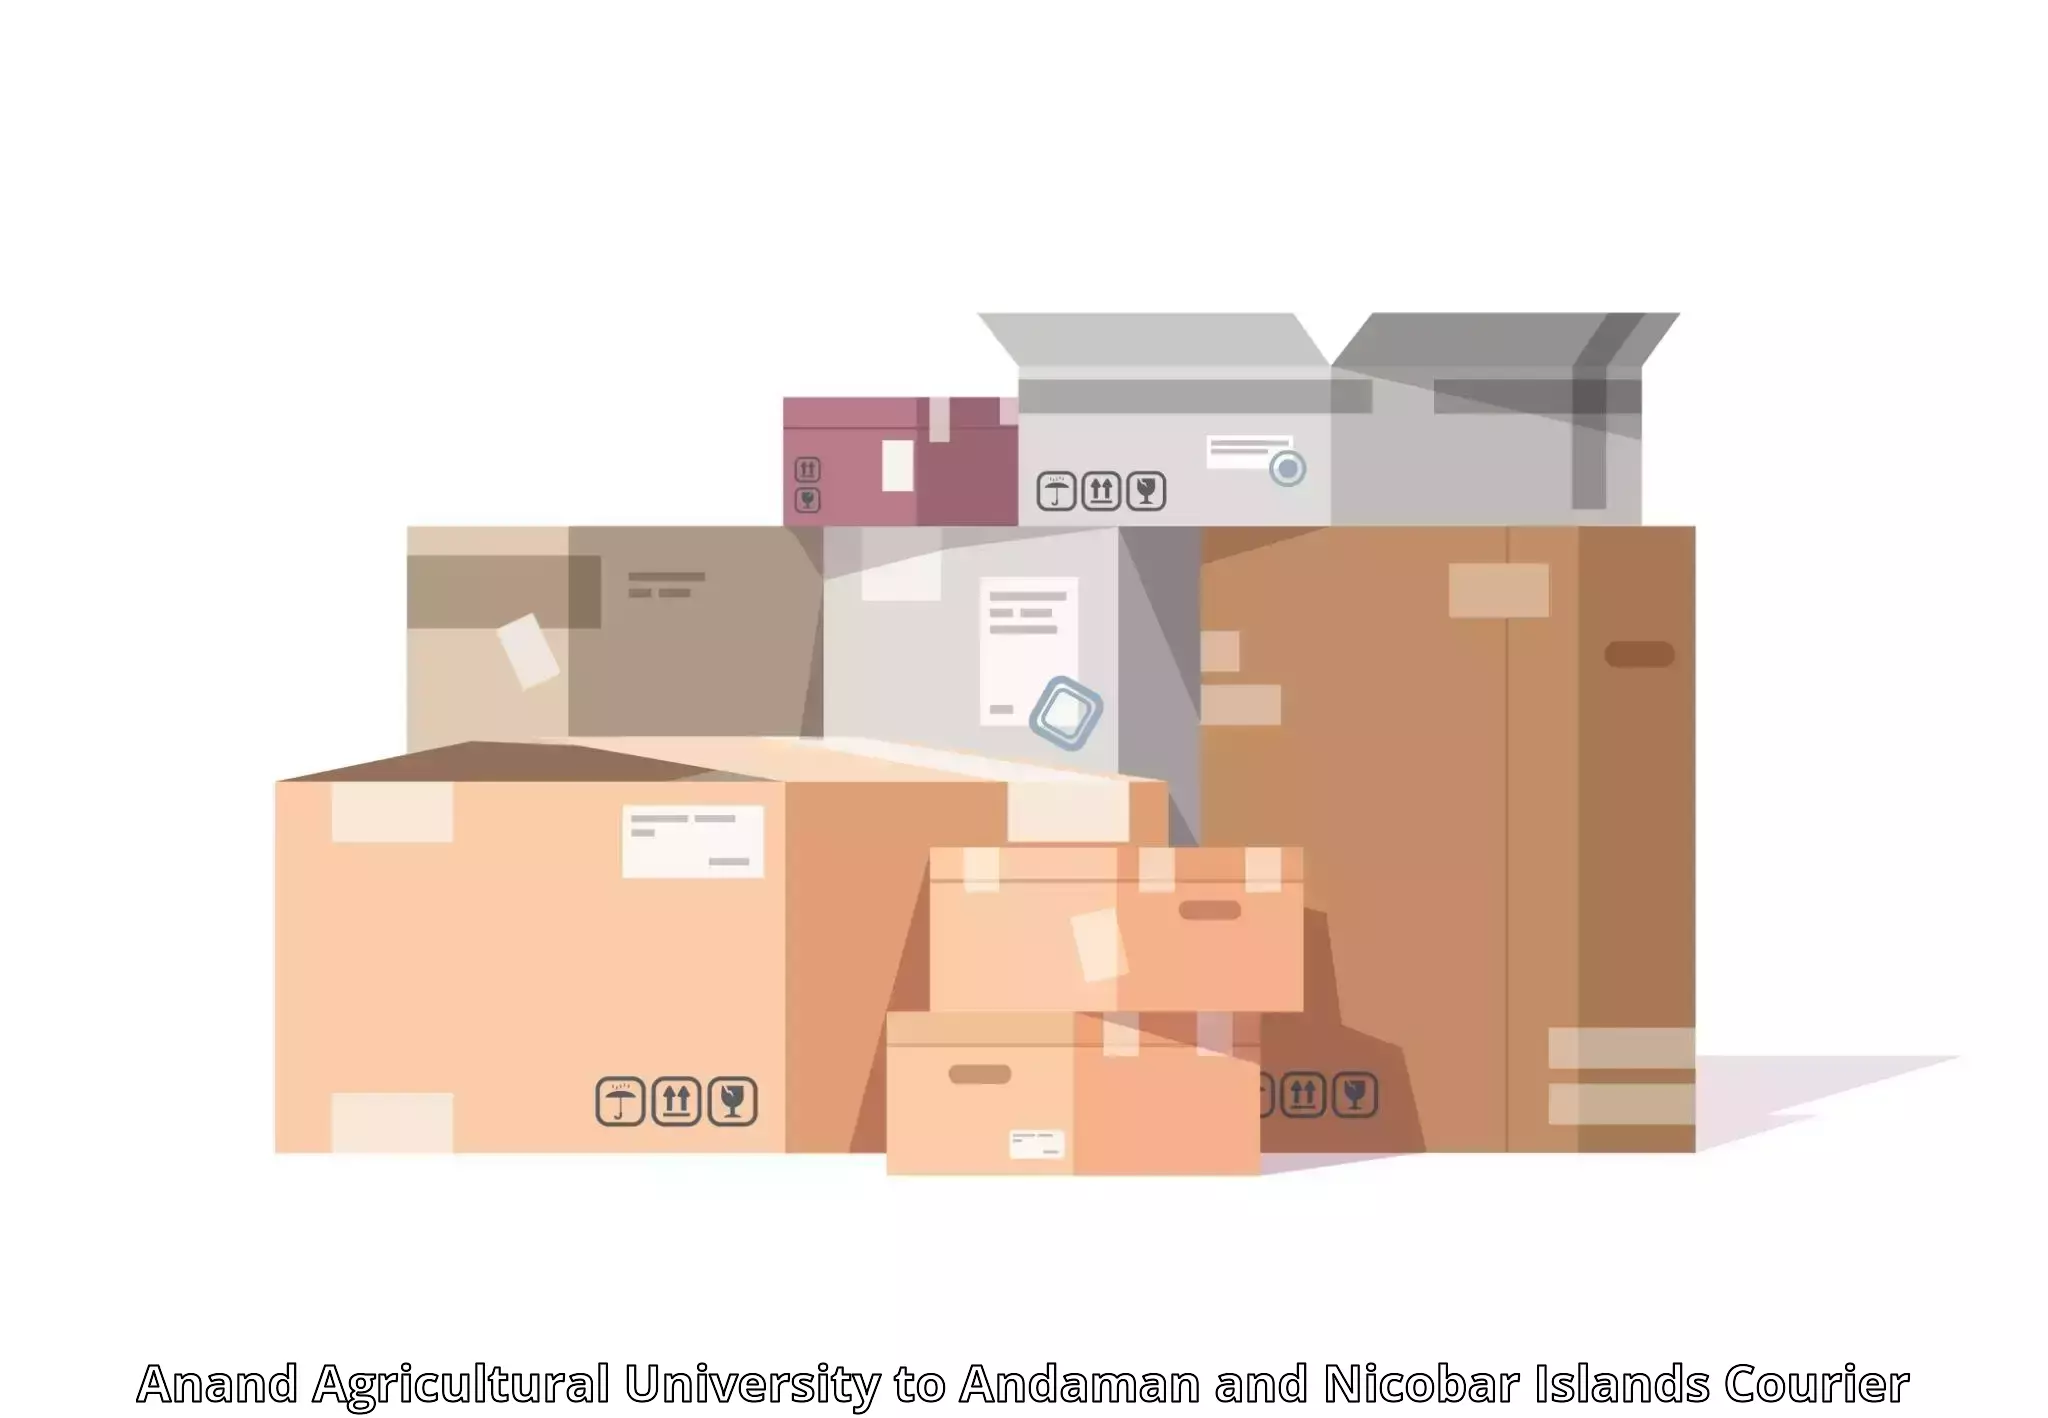 High-efficiency logistics Anand Agricultural University to North And Middle Andaman